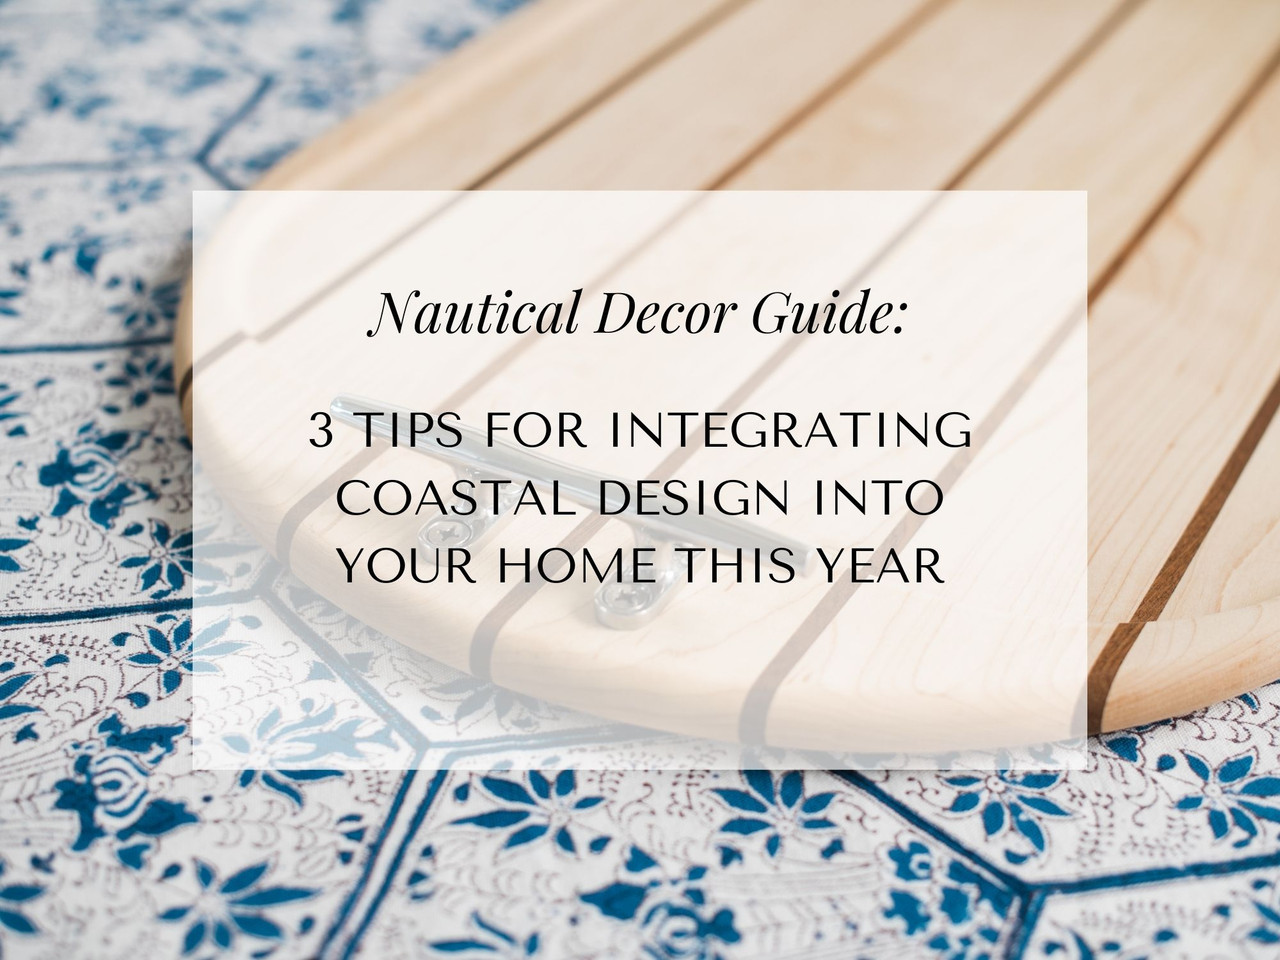 3 Tips for Integrating Coastal Design Into Your Home This Year